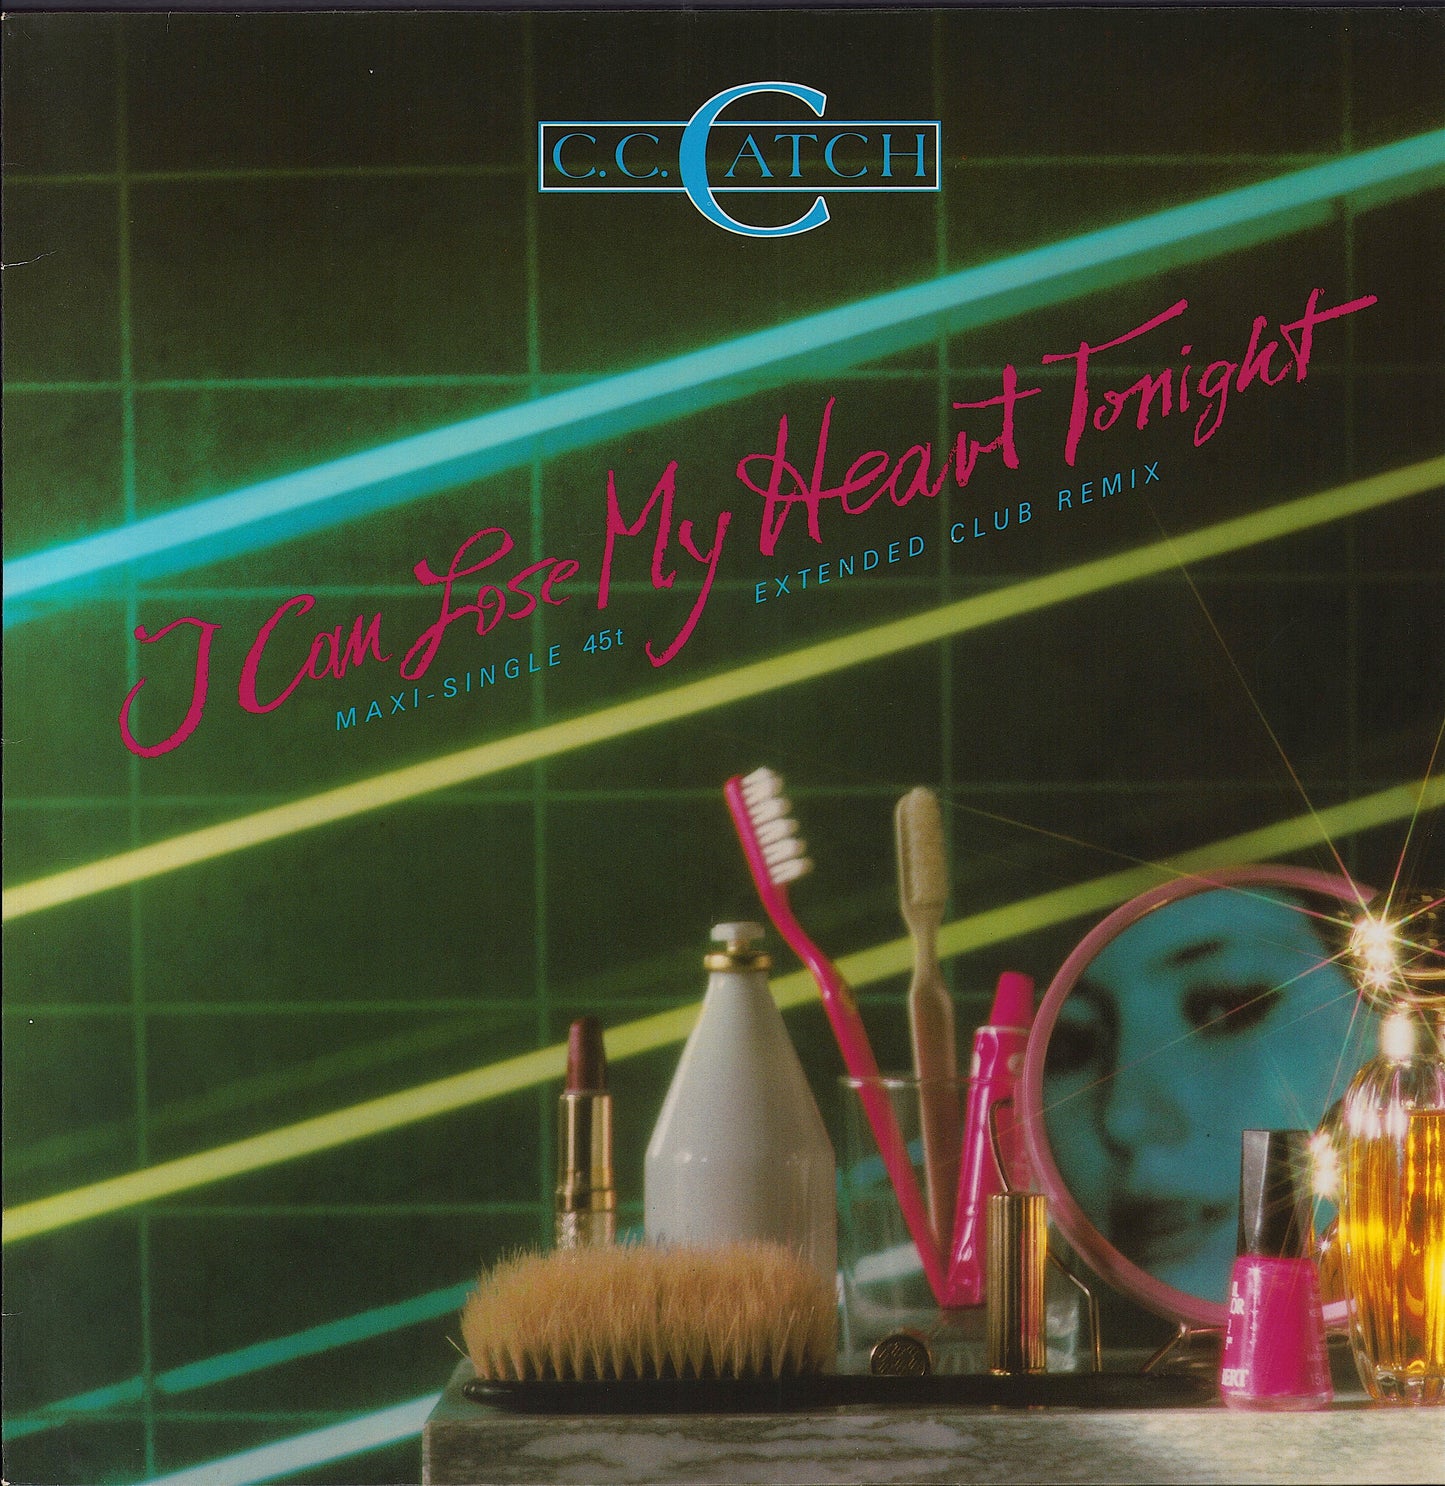 C.C. Catch - I Can Lose My Heart Tonight (Extended Club Remix) (Vinyl 12")